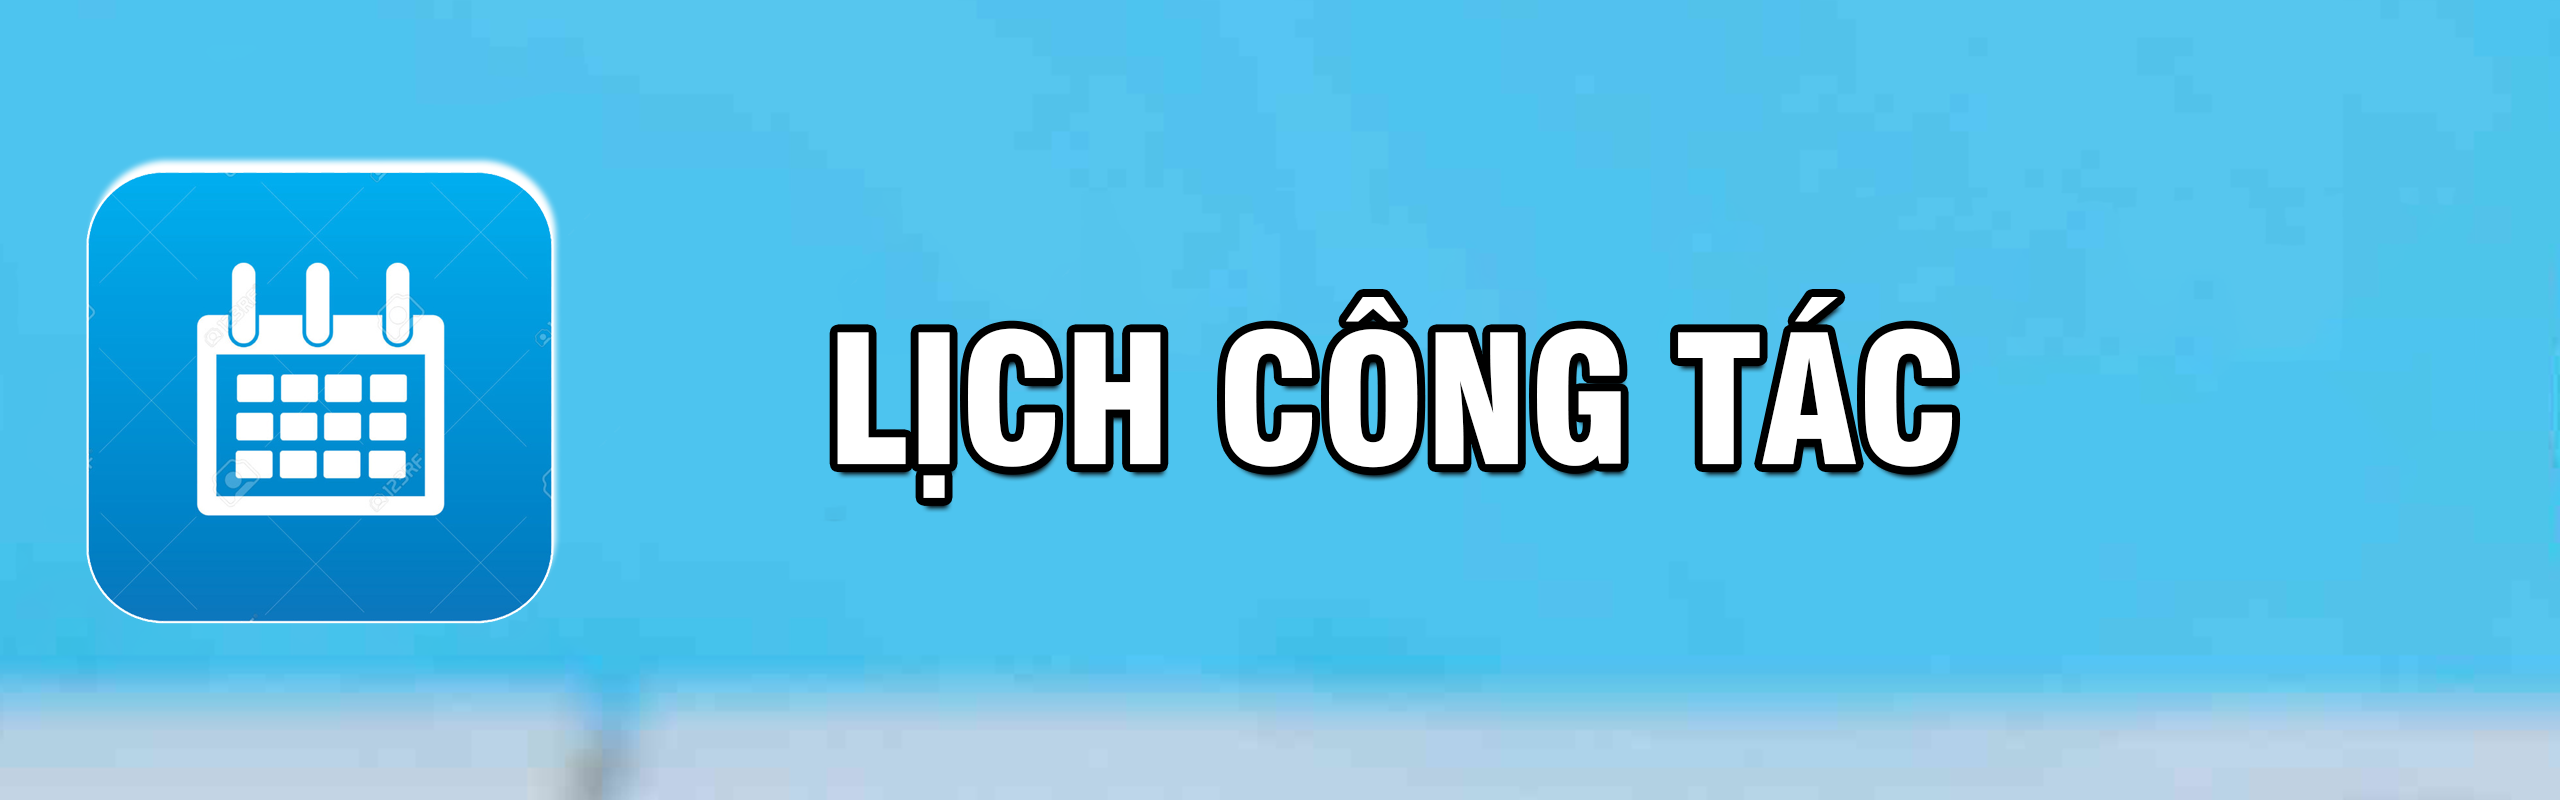 Lichcongtac-(6).png